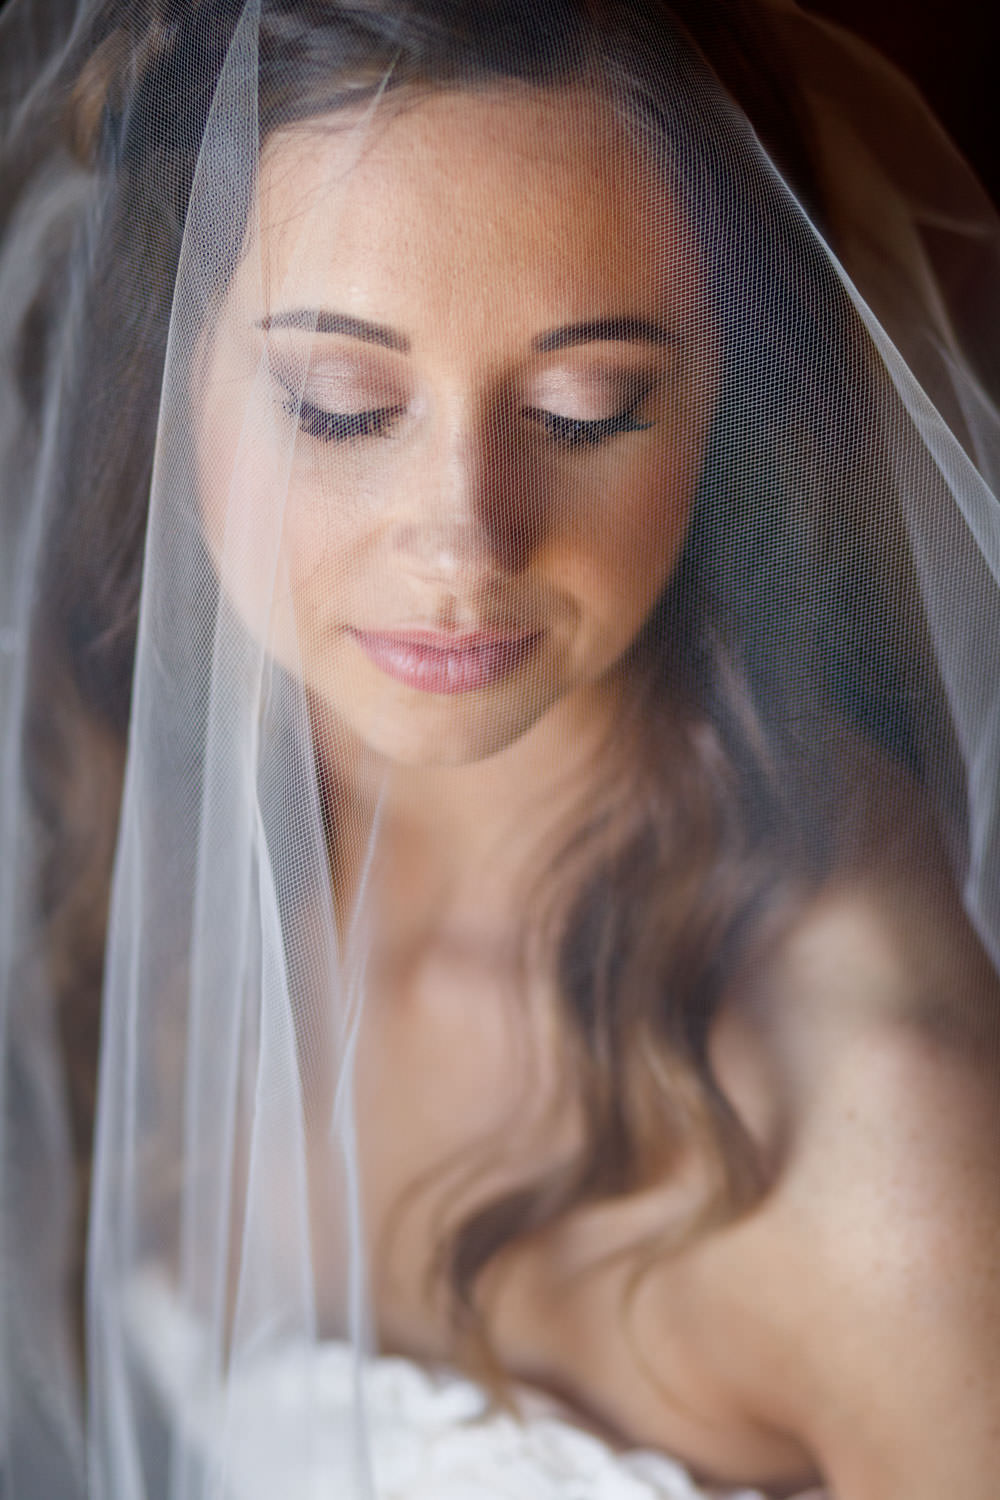 Beautiful wedding day portrait with the brides eyes closed. Shooting through the veil giving a soft look to her portrait.